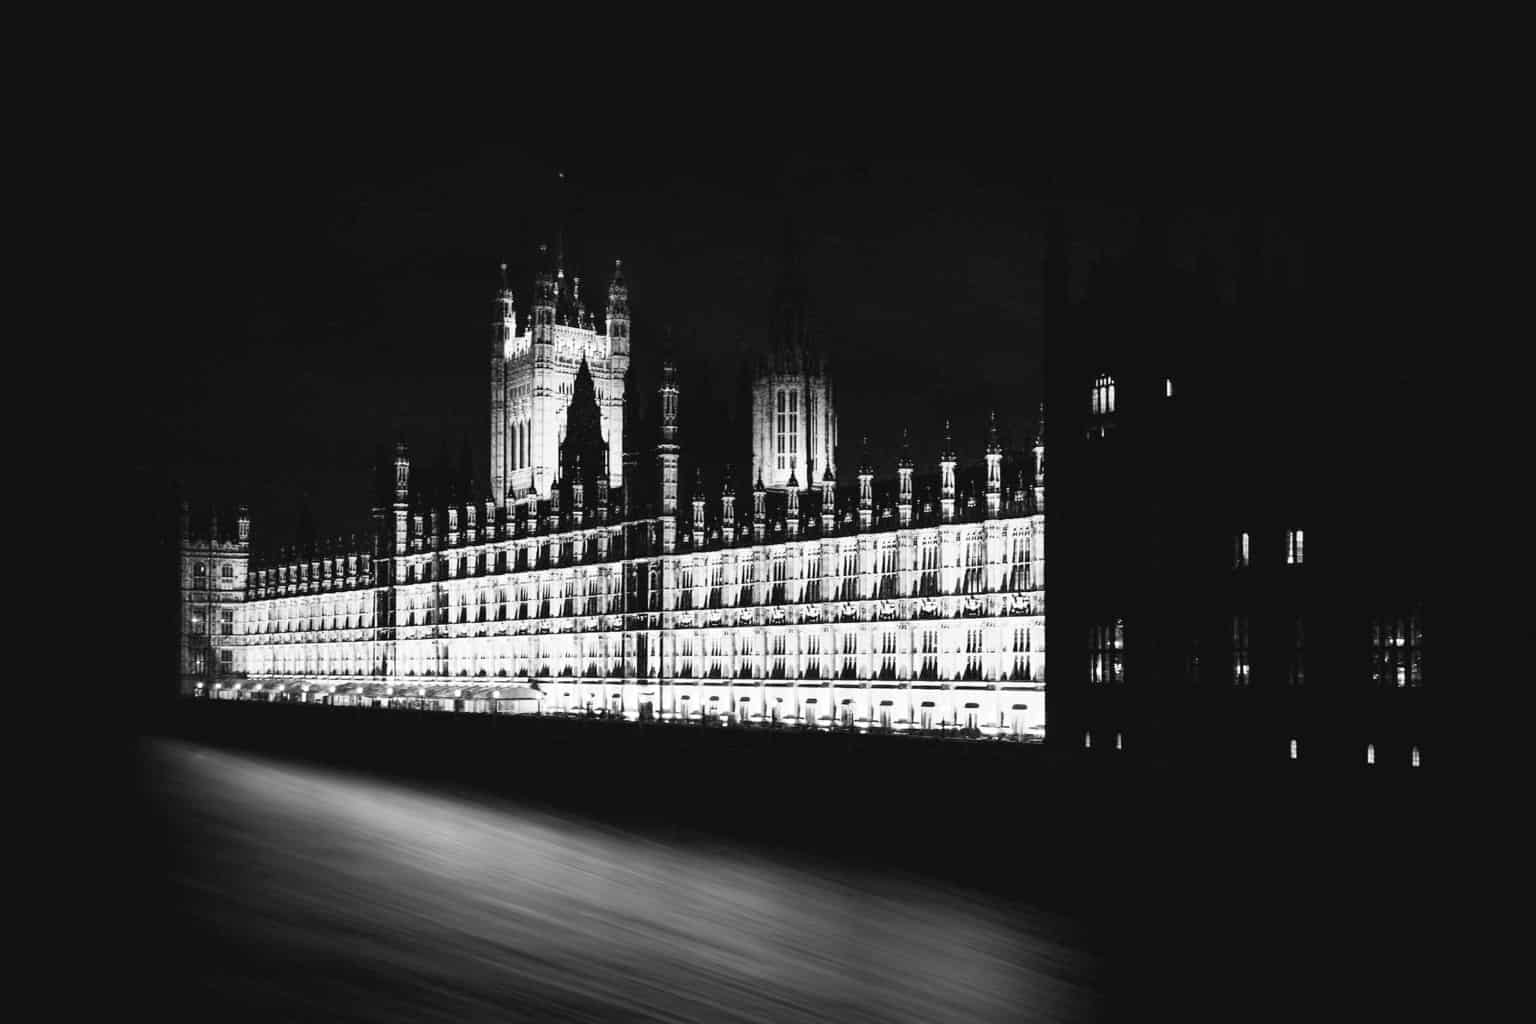  Black and white pictue of the Palace of Westminster at night by Rick McEvoy London Photographer 